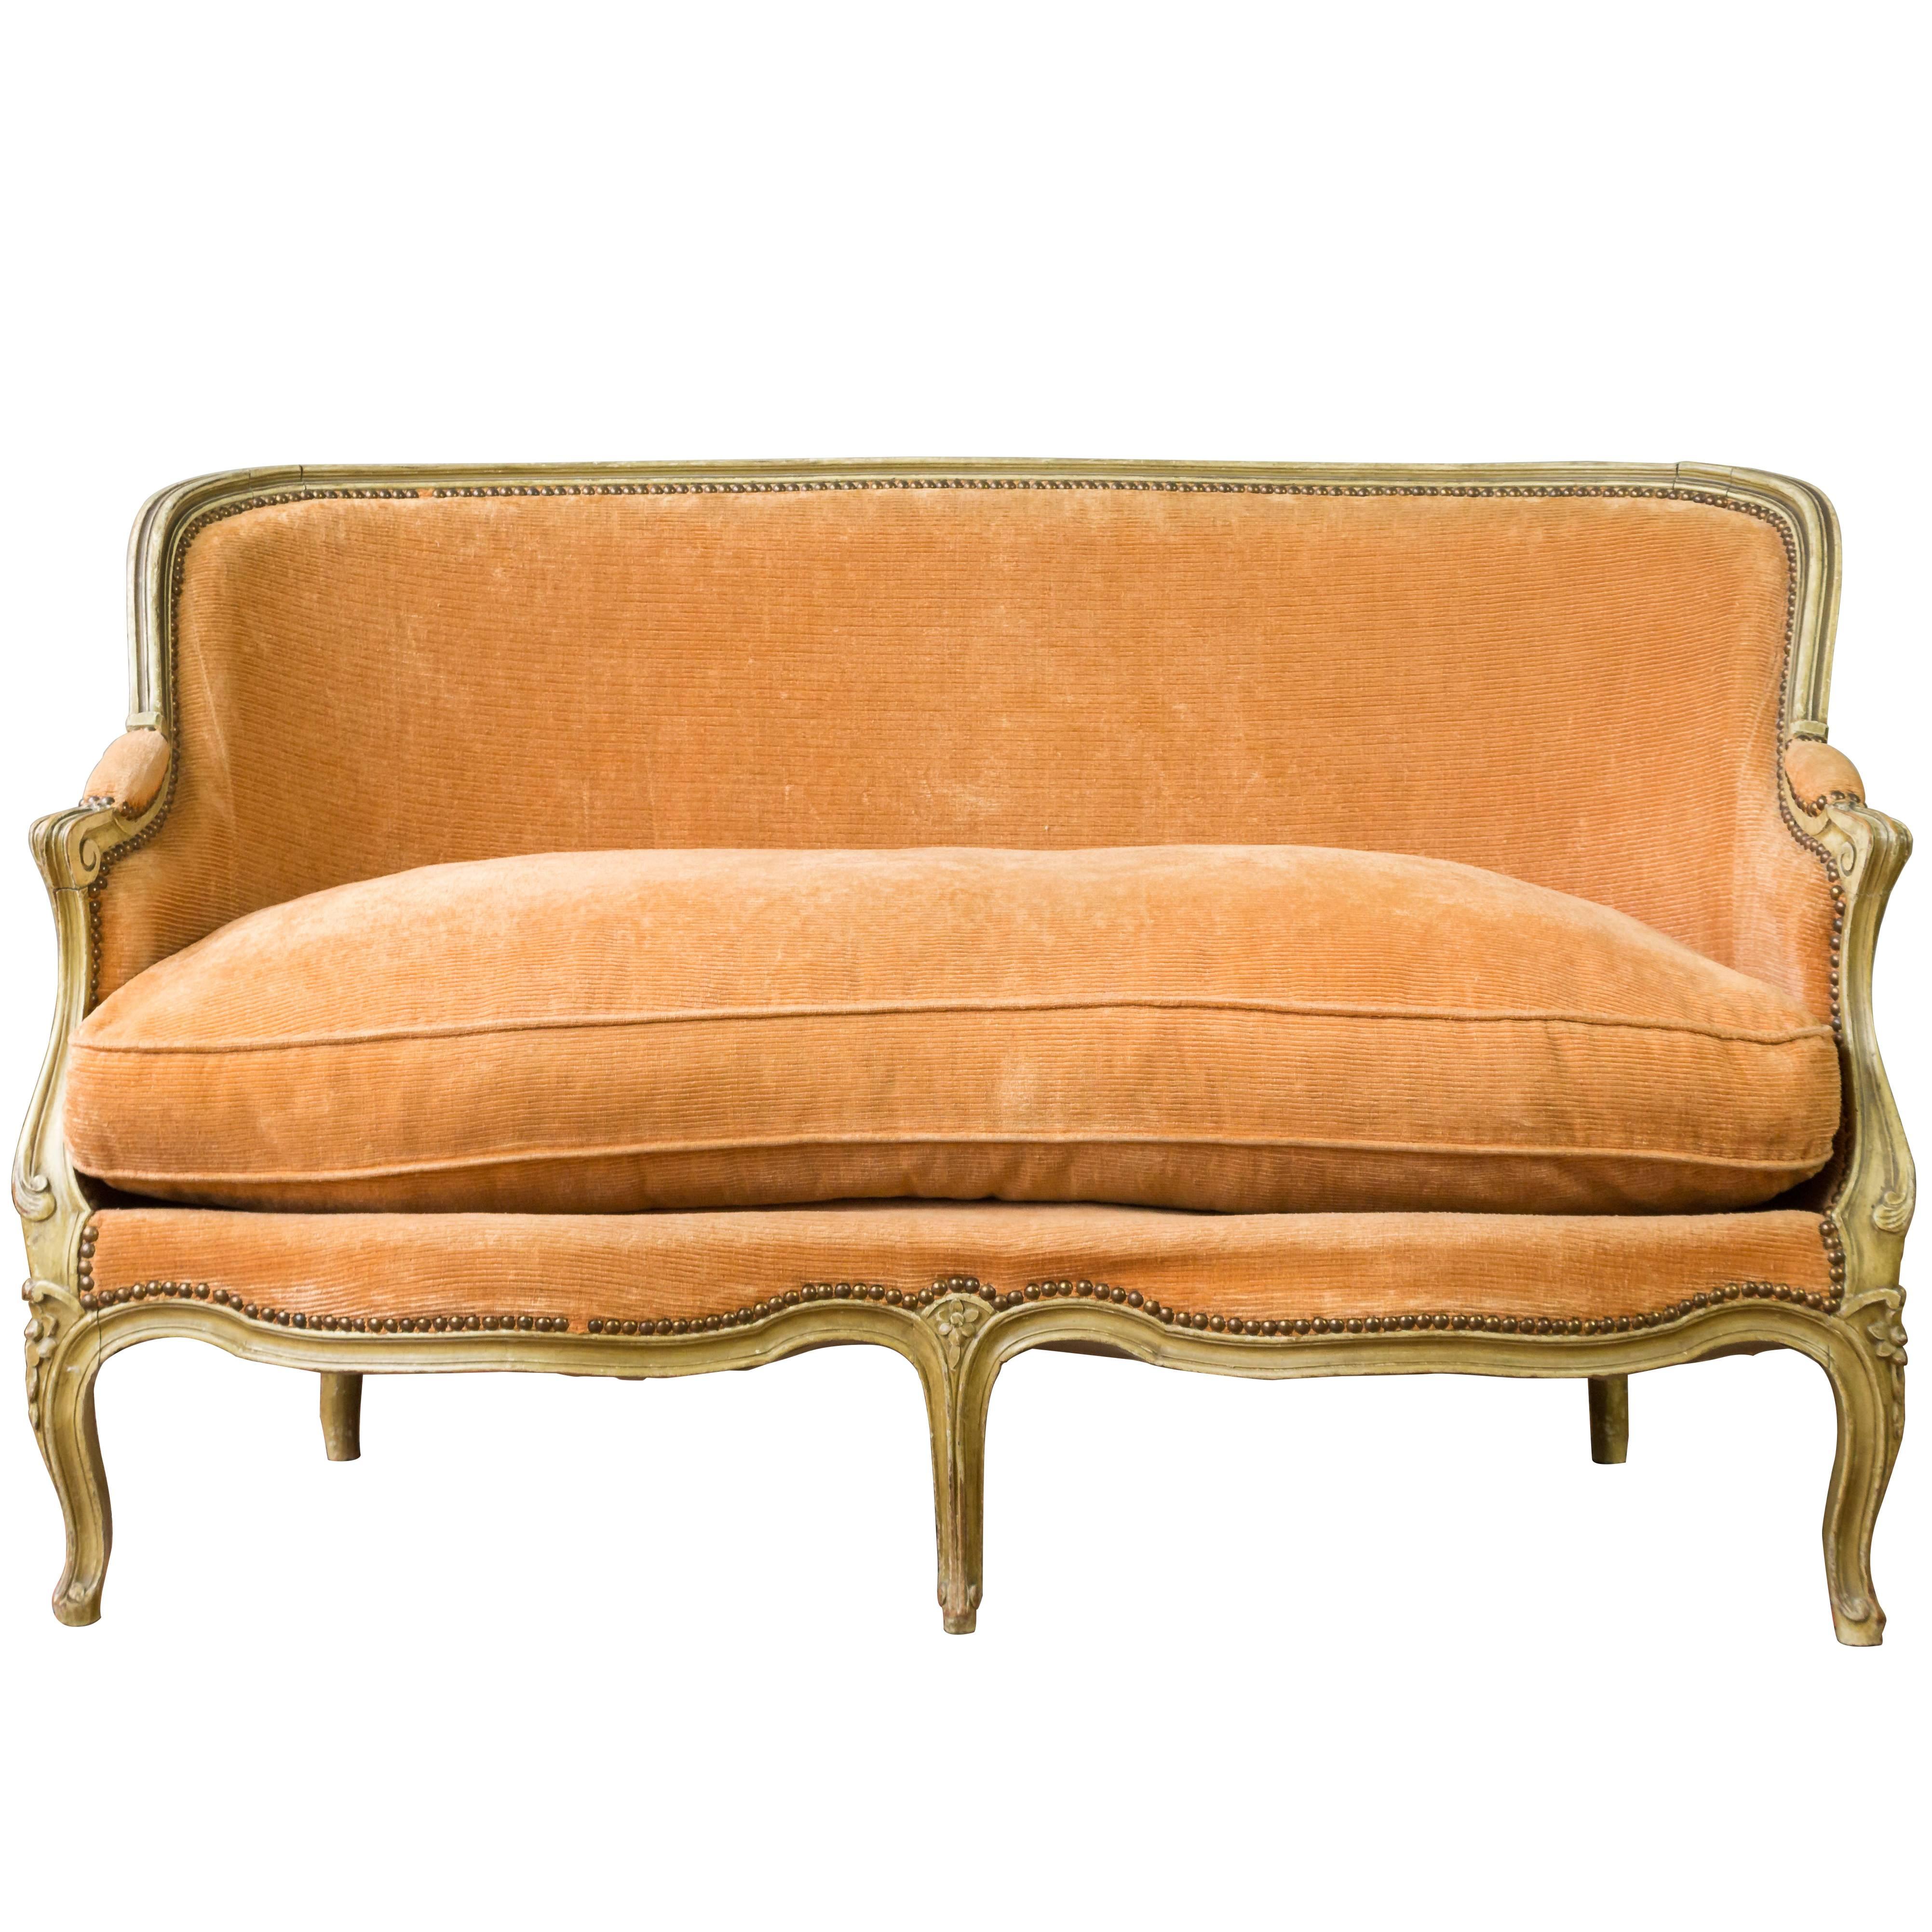 Small French Louis XV Style Settee in Pale Apricot Velvet